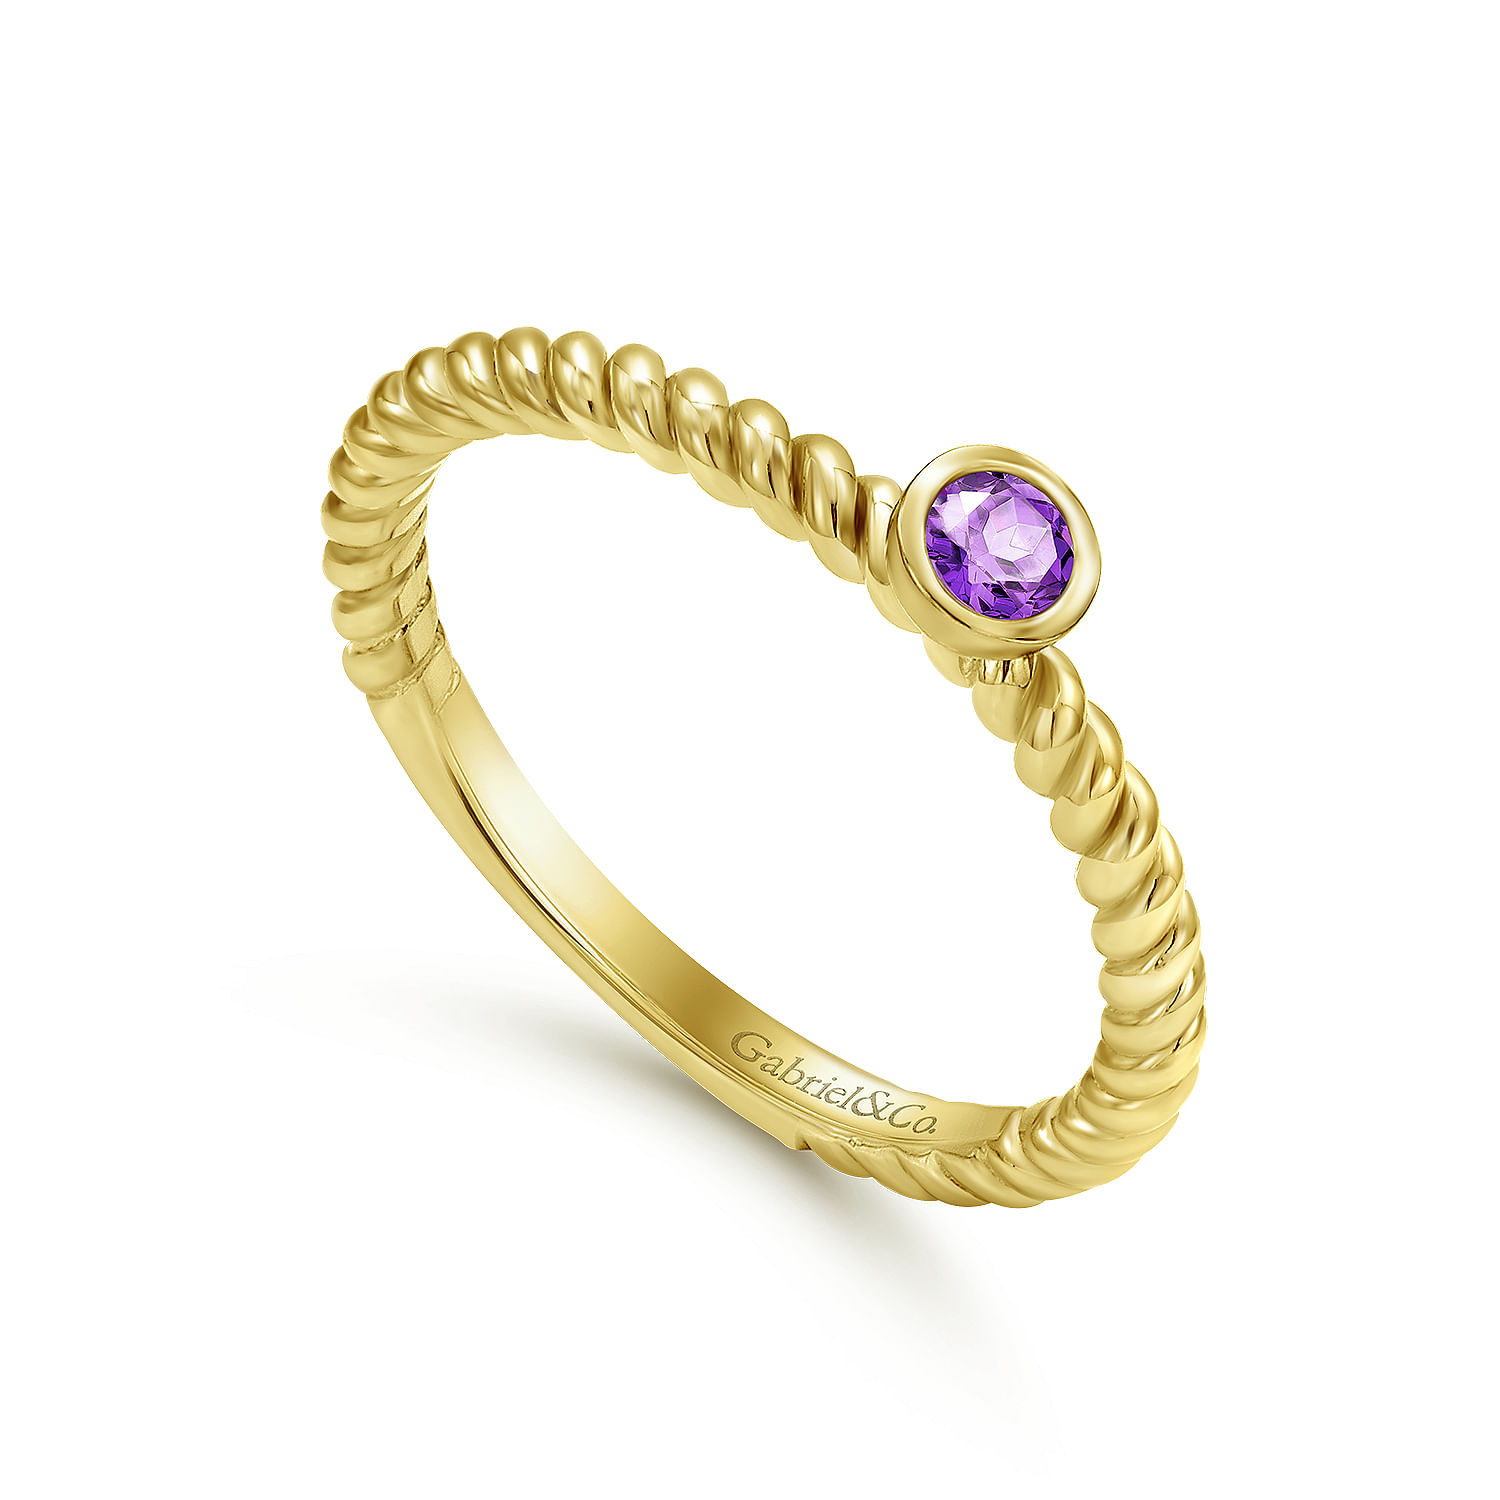 14K Yellow Gold Bezel Set Amethyst Ring with Twisted Rope Shank